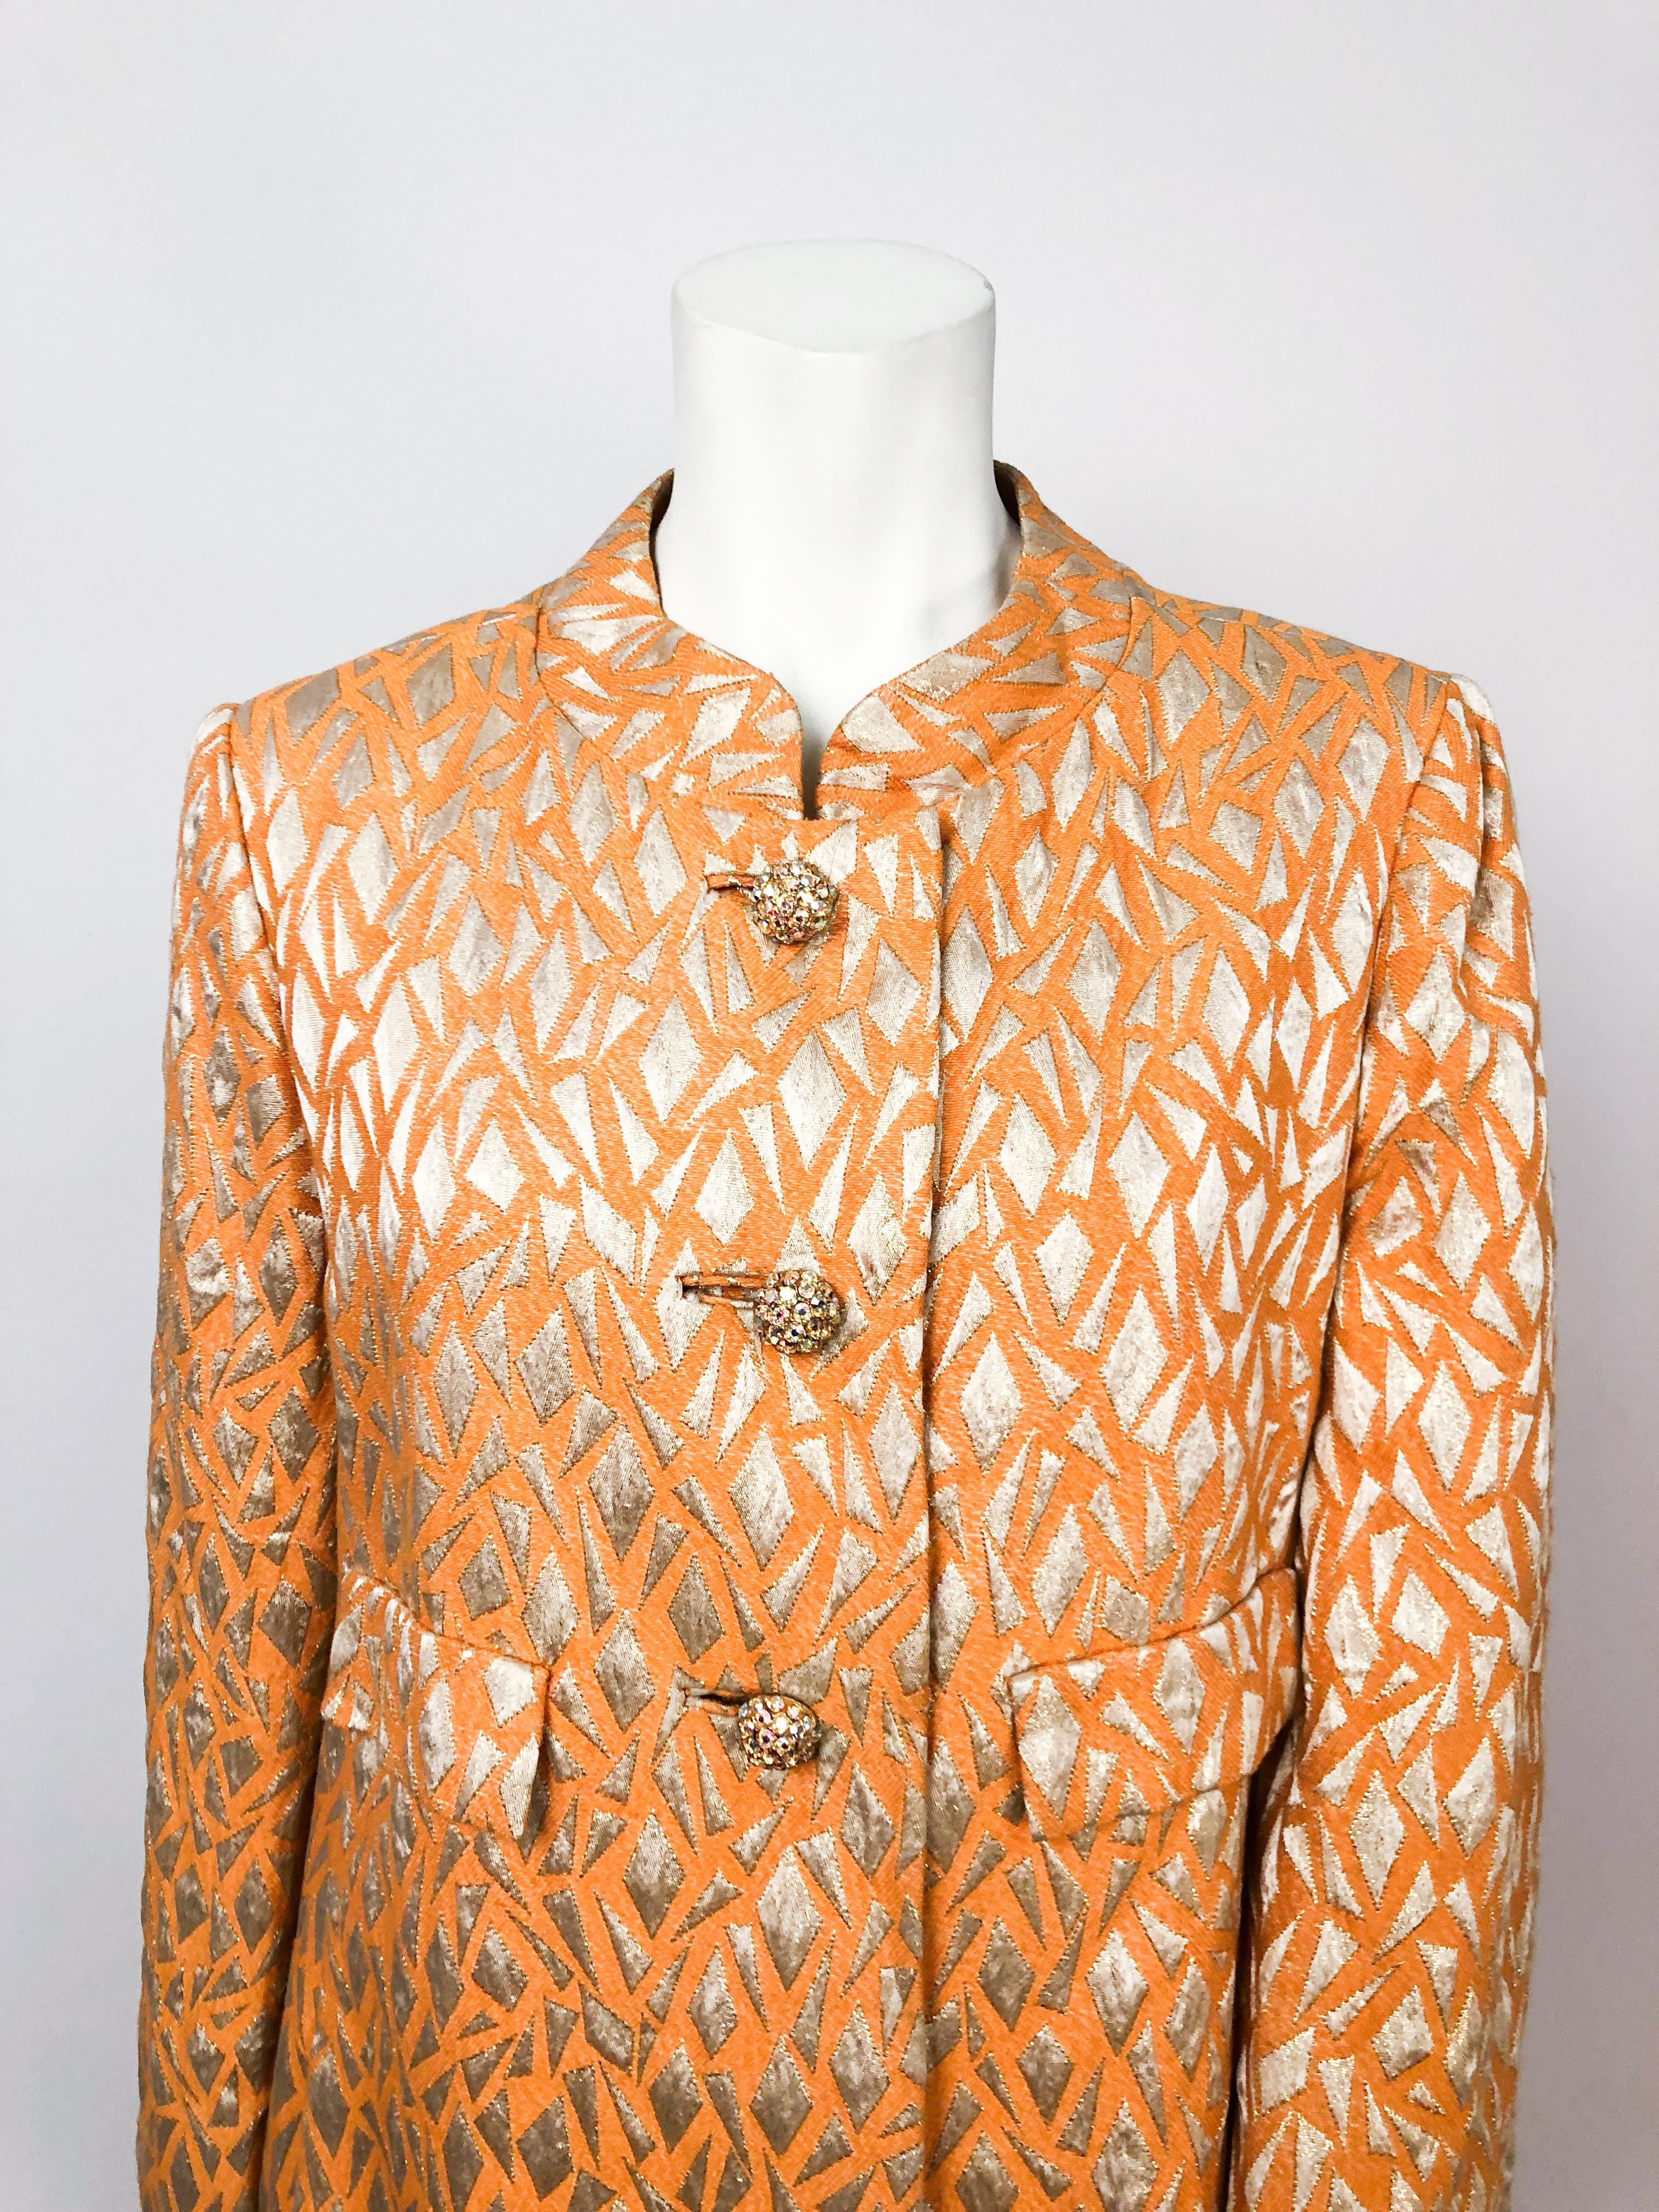 1960s Mardi Gras Orange Evening Coat with Metallic Brocade. Orange and silver lurex brocade pattern a-line evening coat with rhinestone encrusted buttons and inset button holes